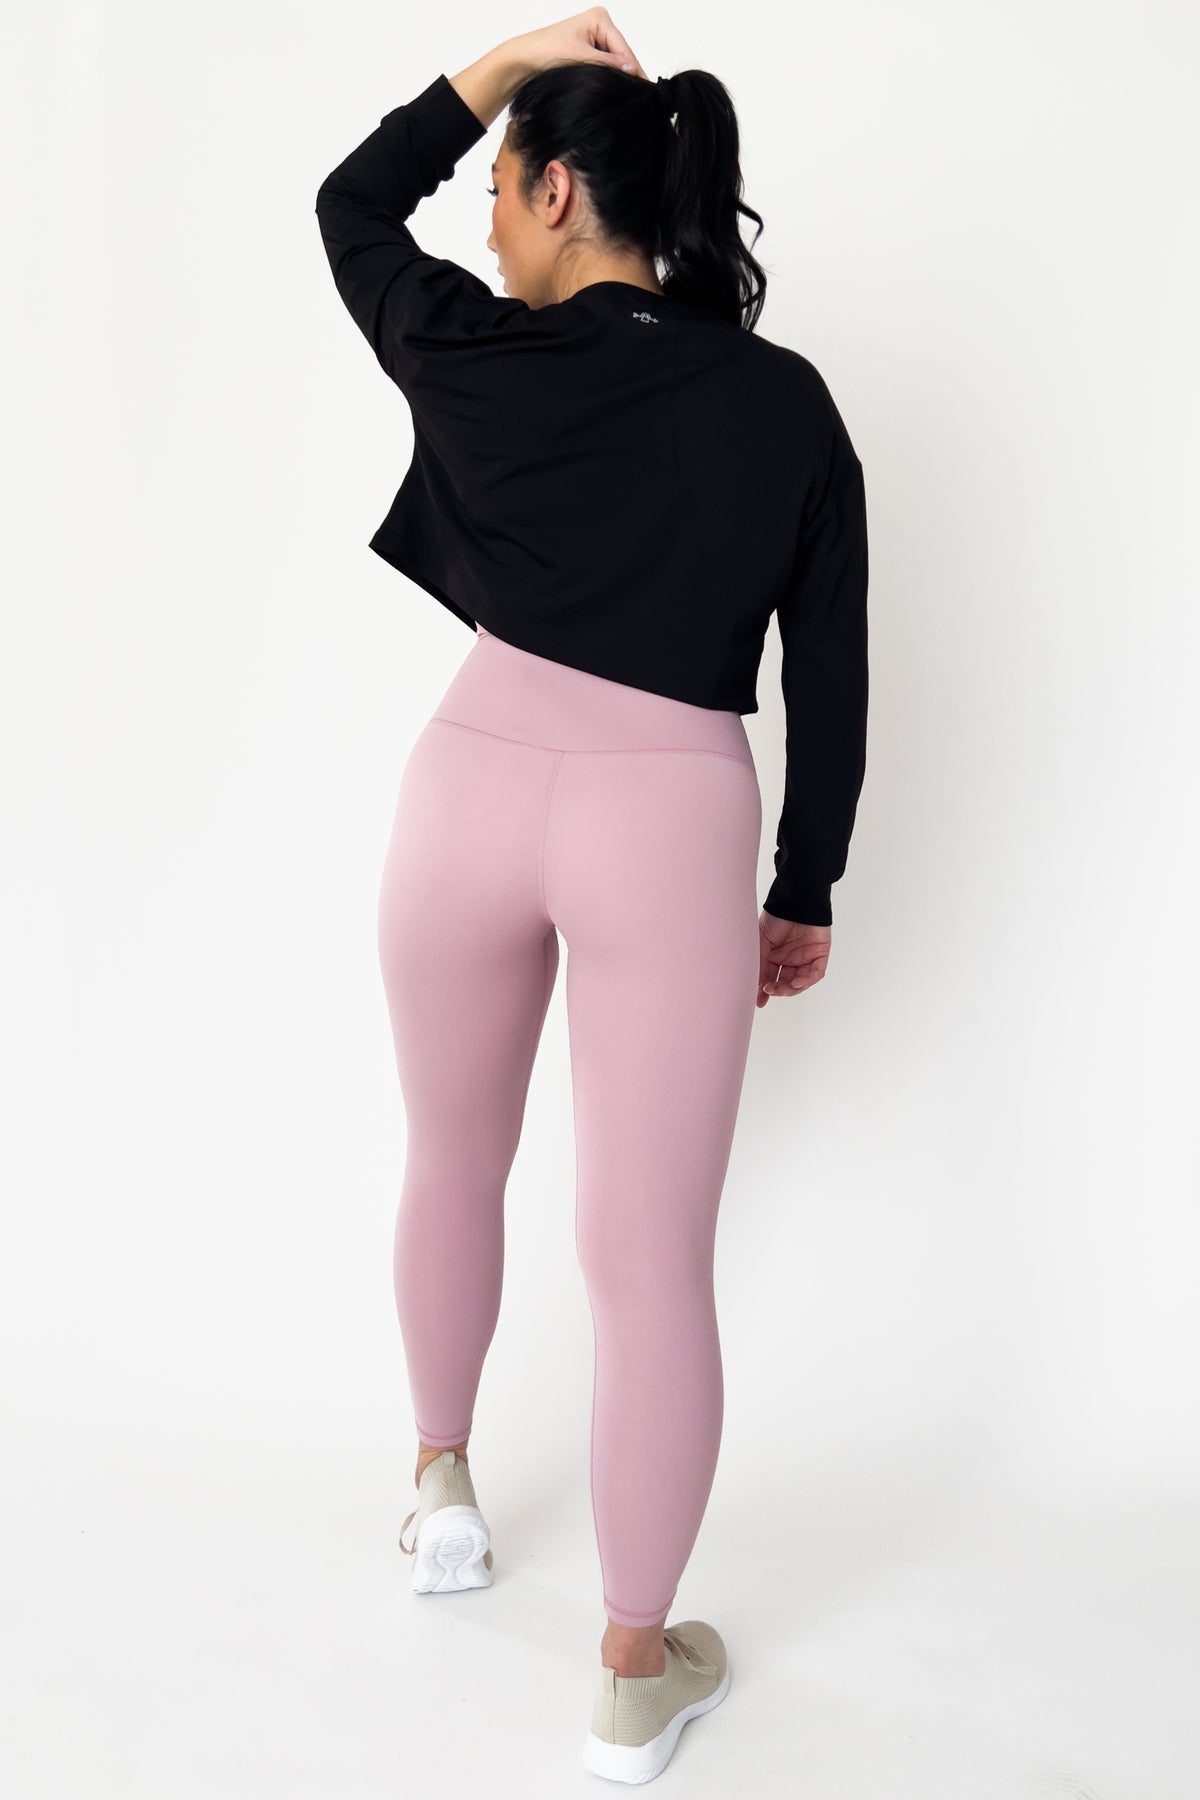 BARE ACTIVEWEAR BARELY THERE PANT